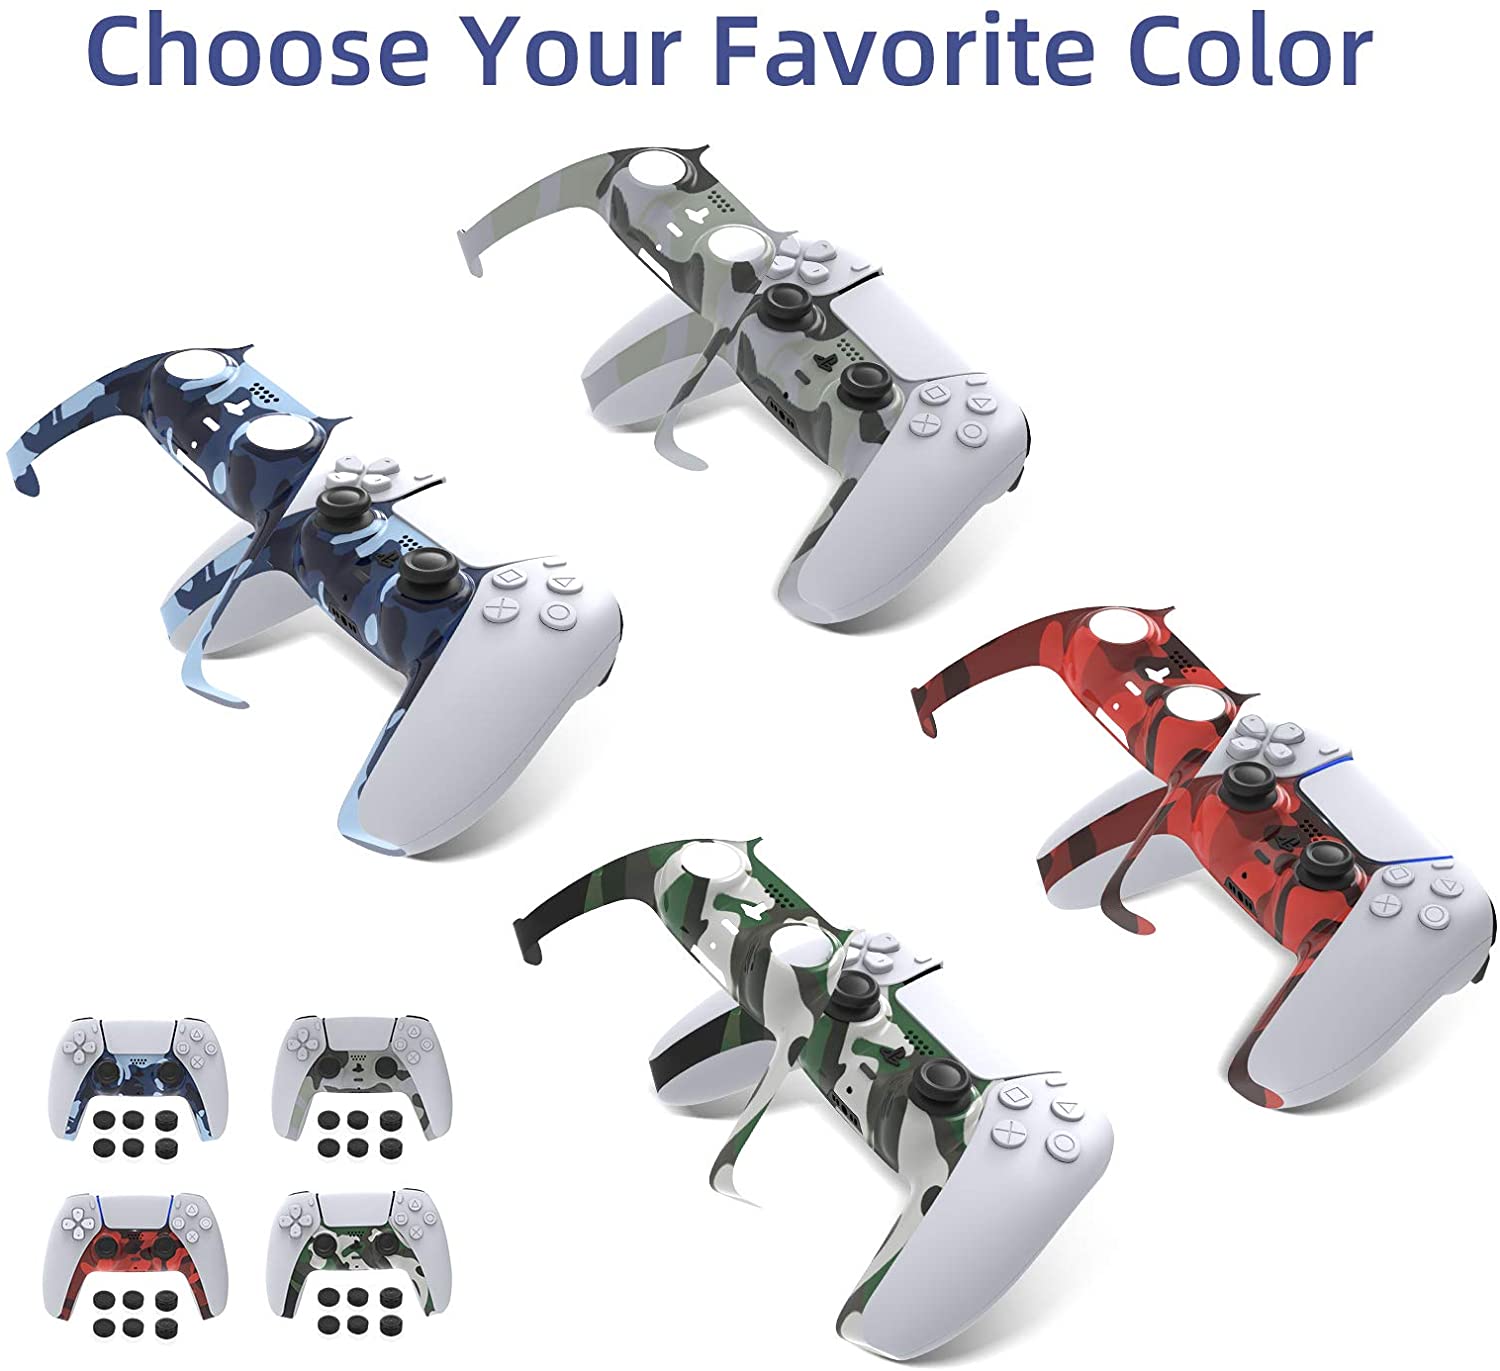 Four colors are available to choose from: blue camouflage, red camouflage, silver camouflage, and gold camouflage.